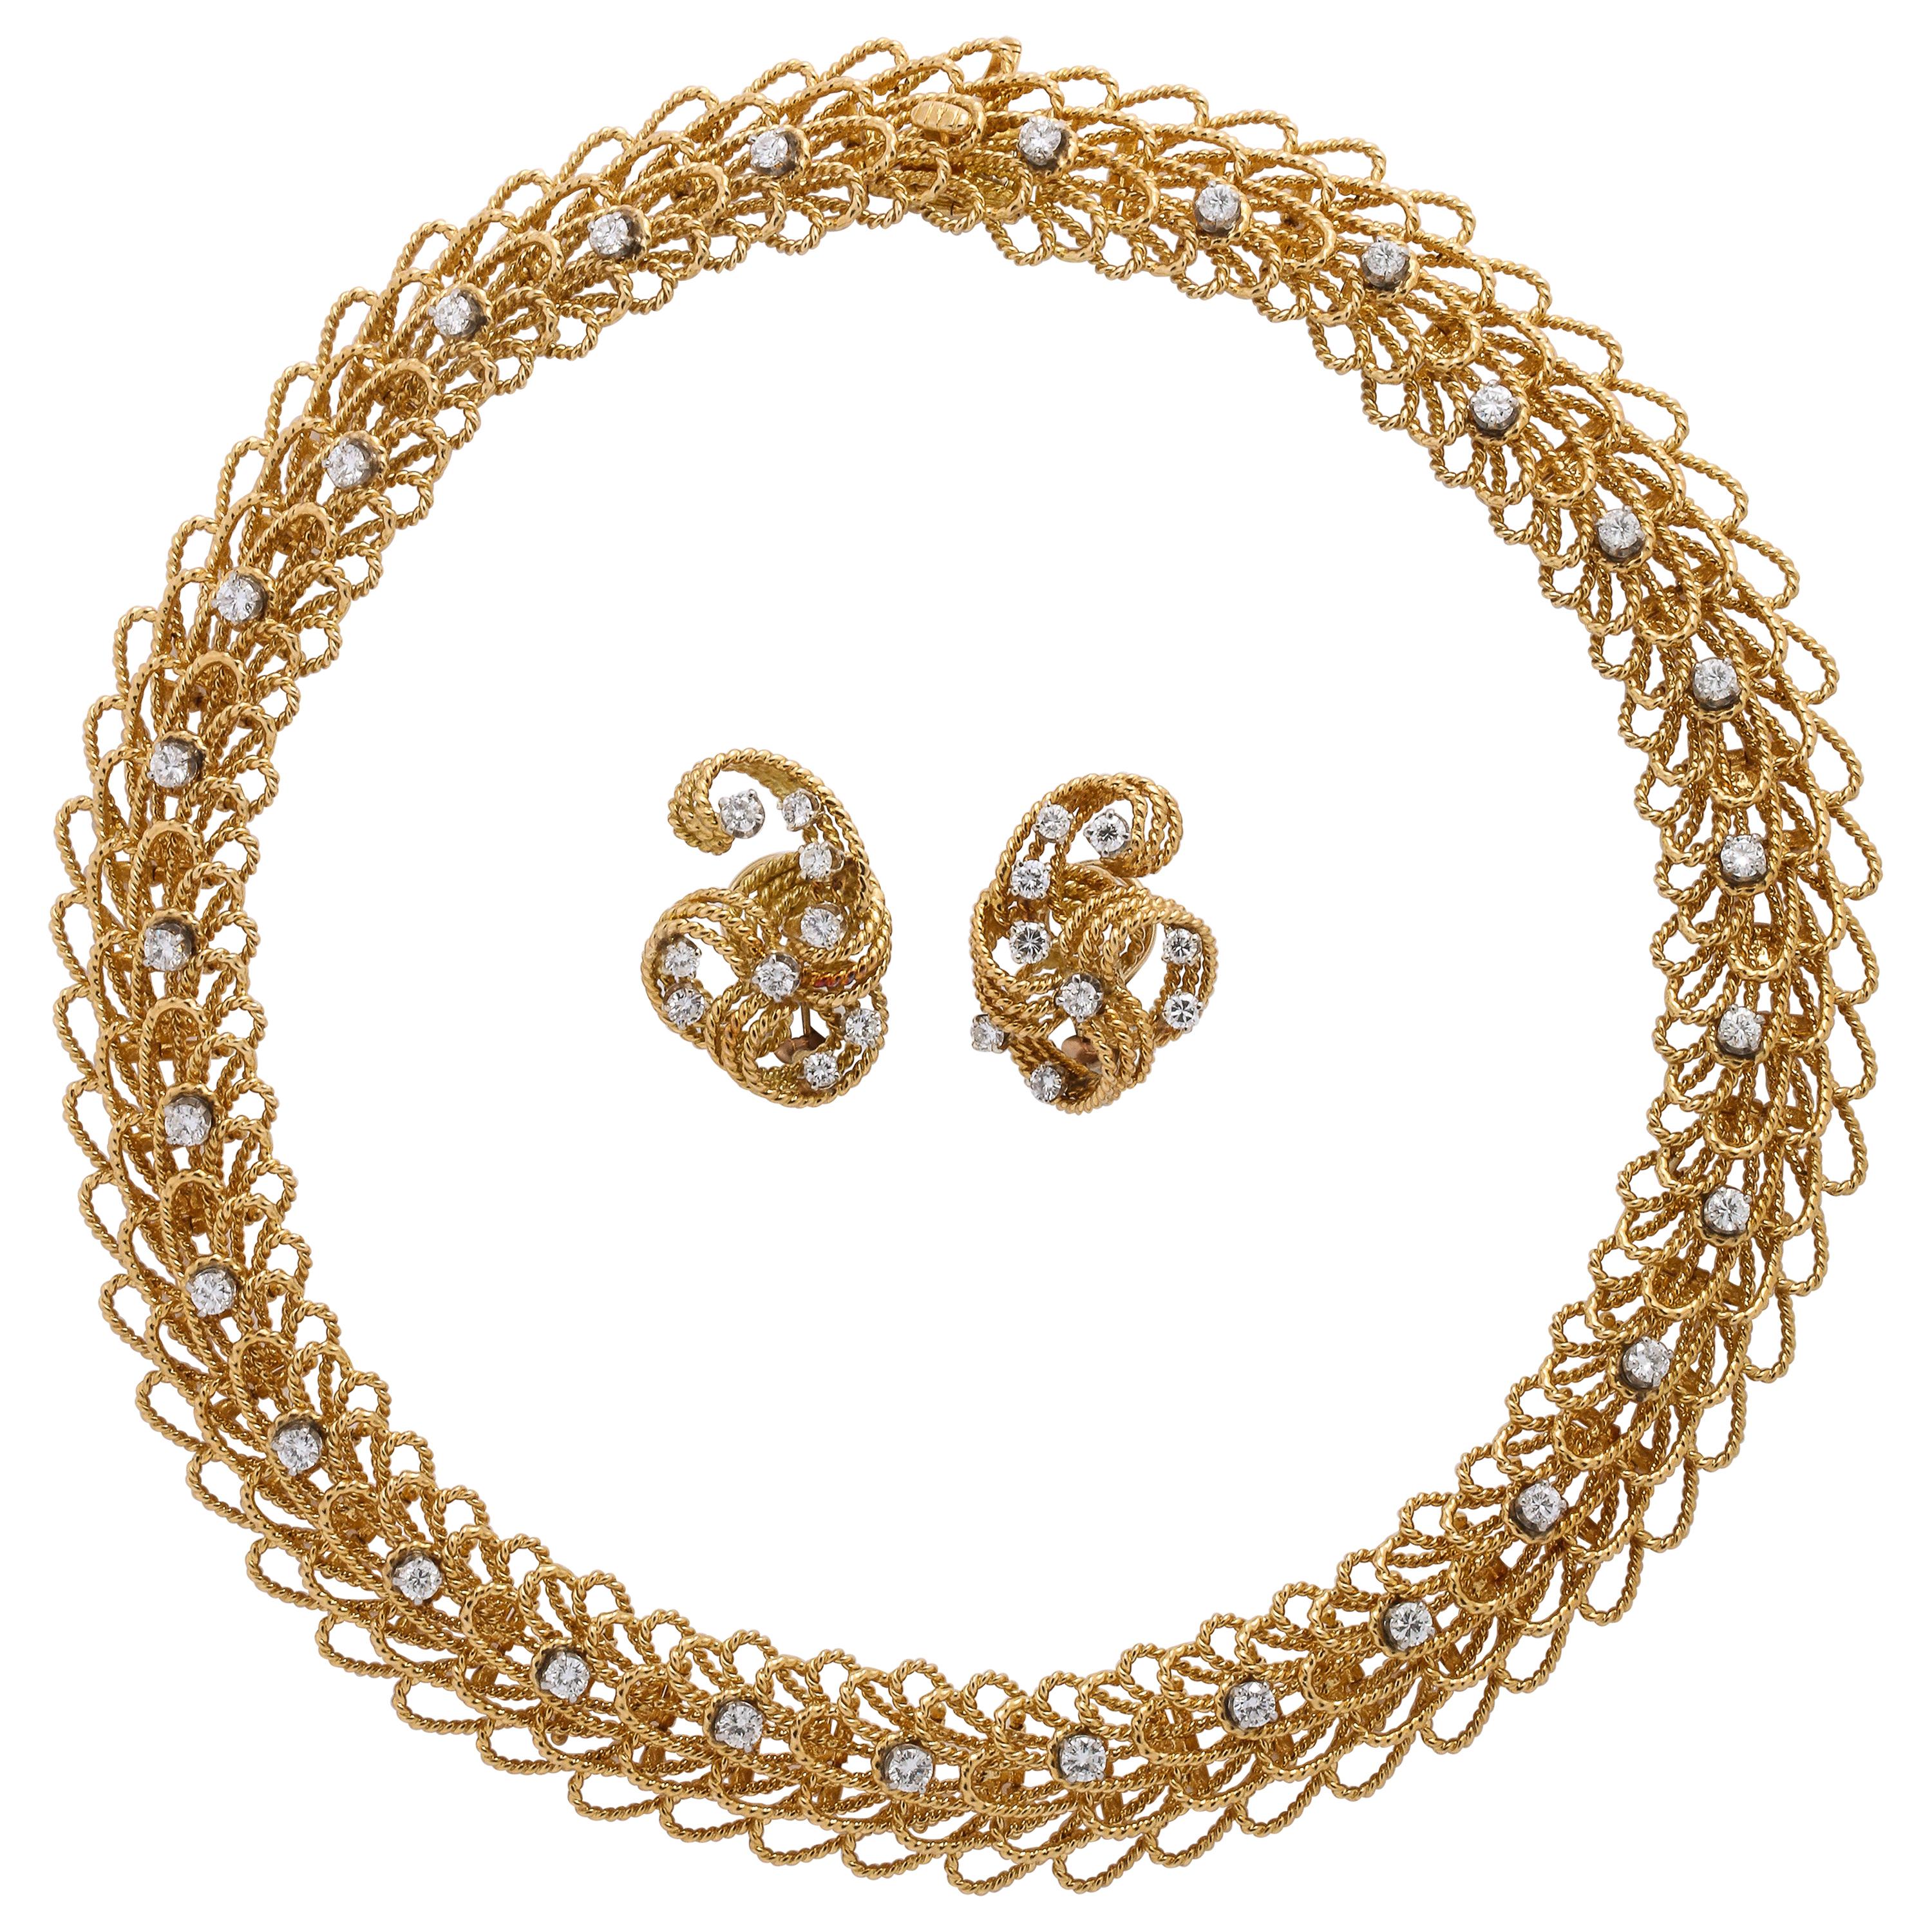 1970s Retro Twisted Wire 18 Karat Gold Diamond Cuff Necklace and Earring Set